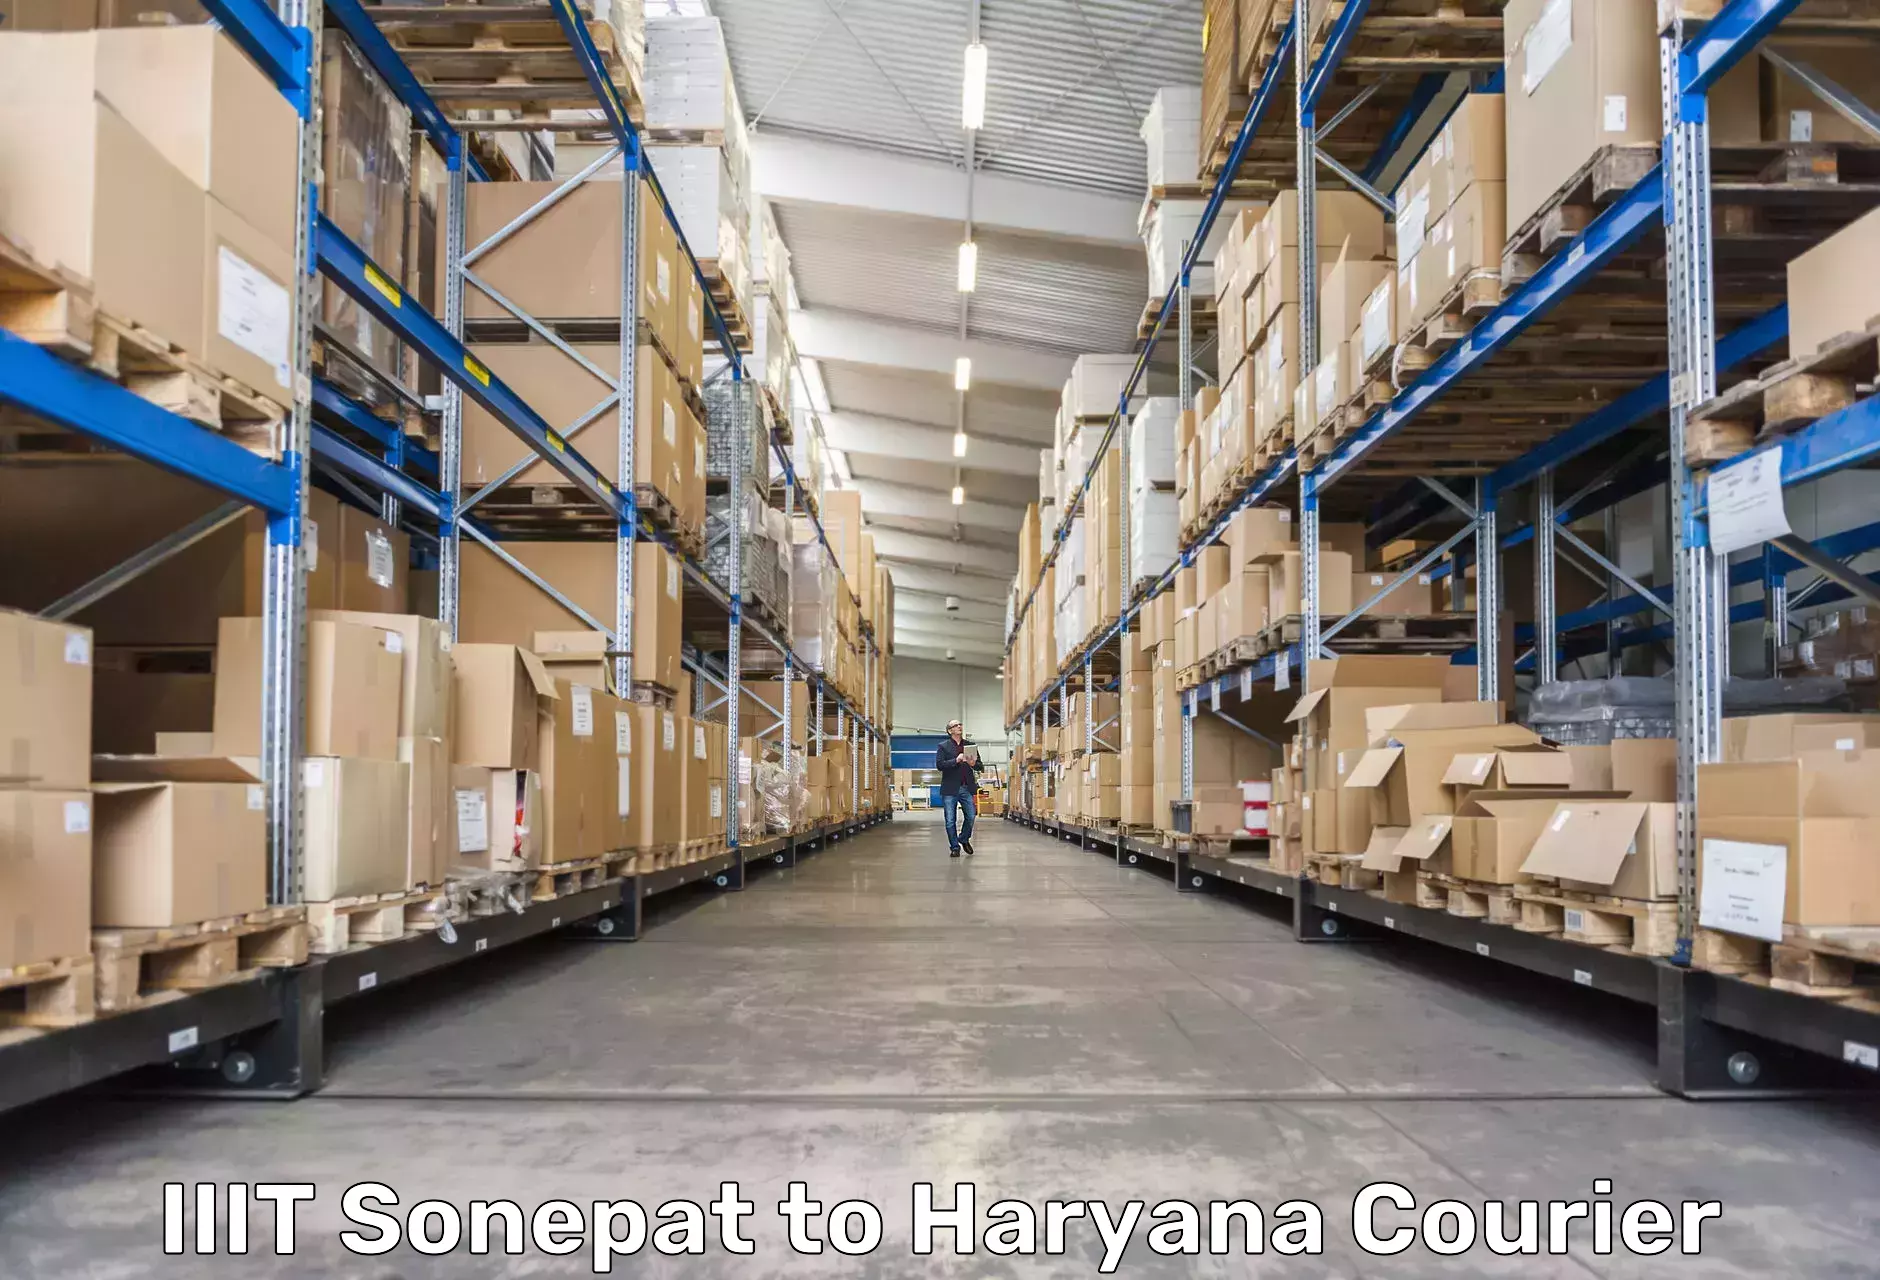 Courier rate comparison IIIT Sonepat to Faridabad